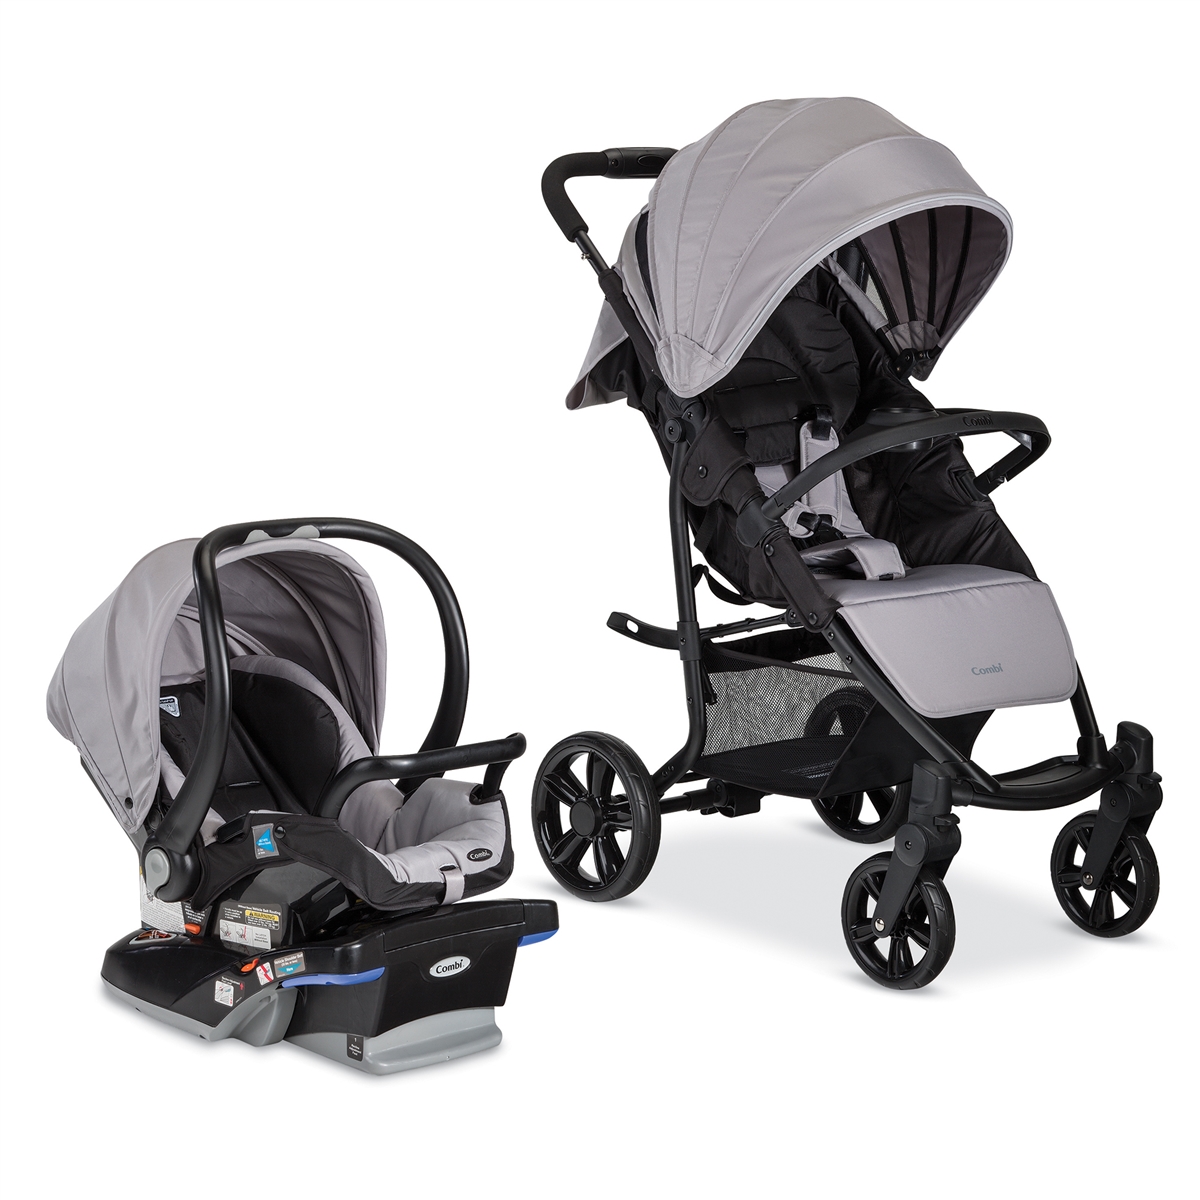 Go walking with Combi Shuttle Travel System